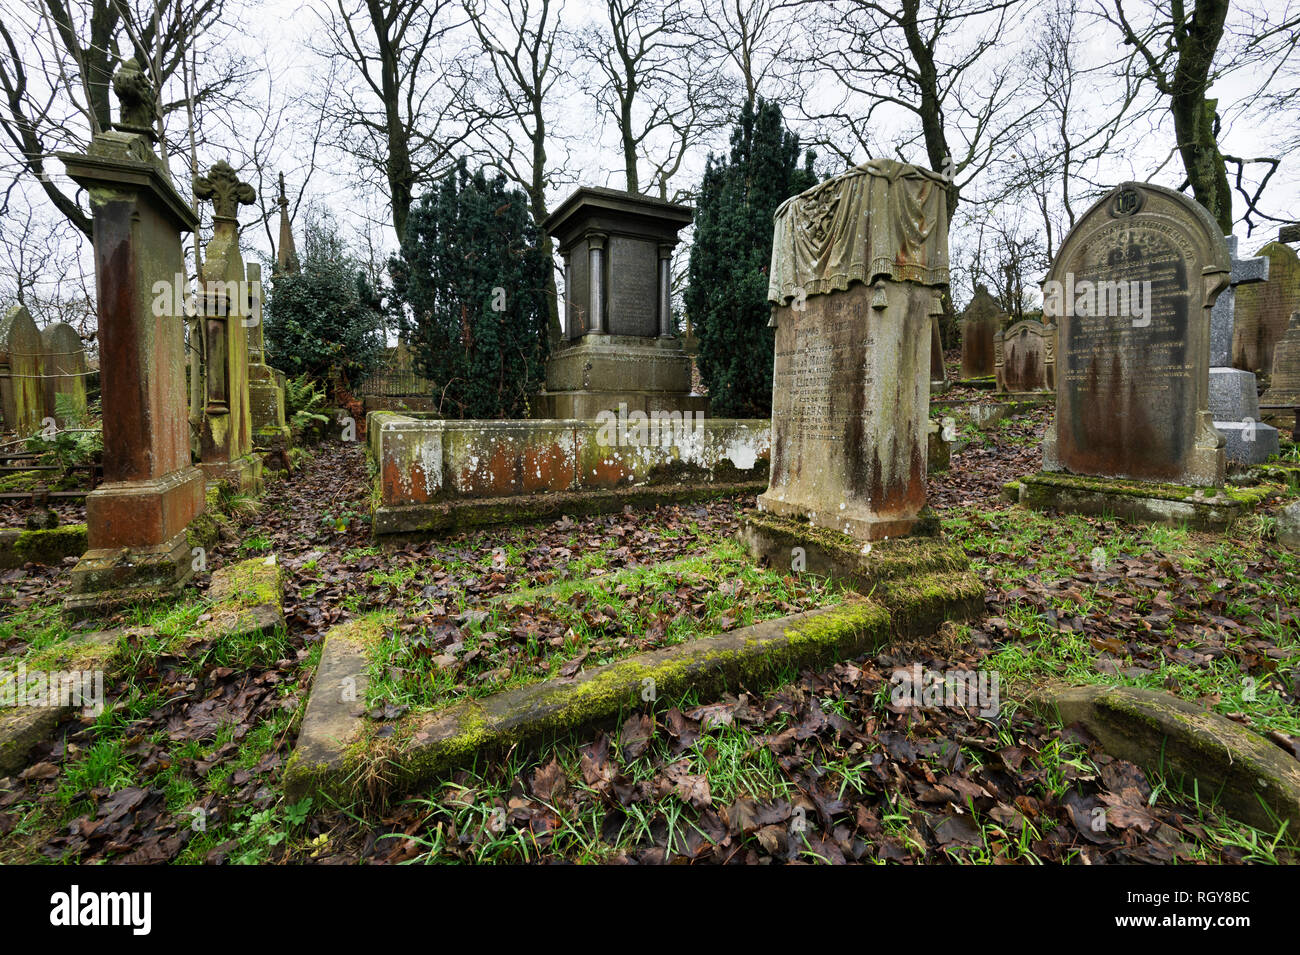 Graves in the churchyard of St Michael's and All Angels' Church, Haworth, West Yorkshire. The church is famous for its association with the Brontes. Stock Photo